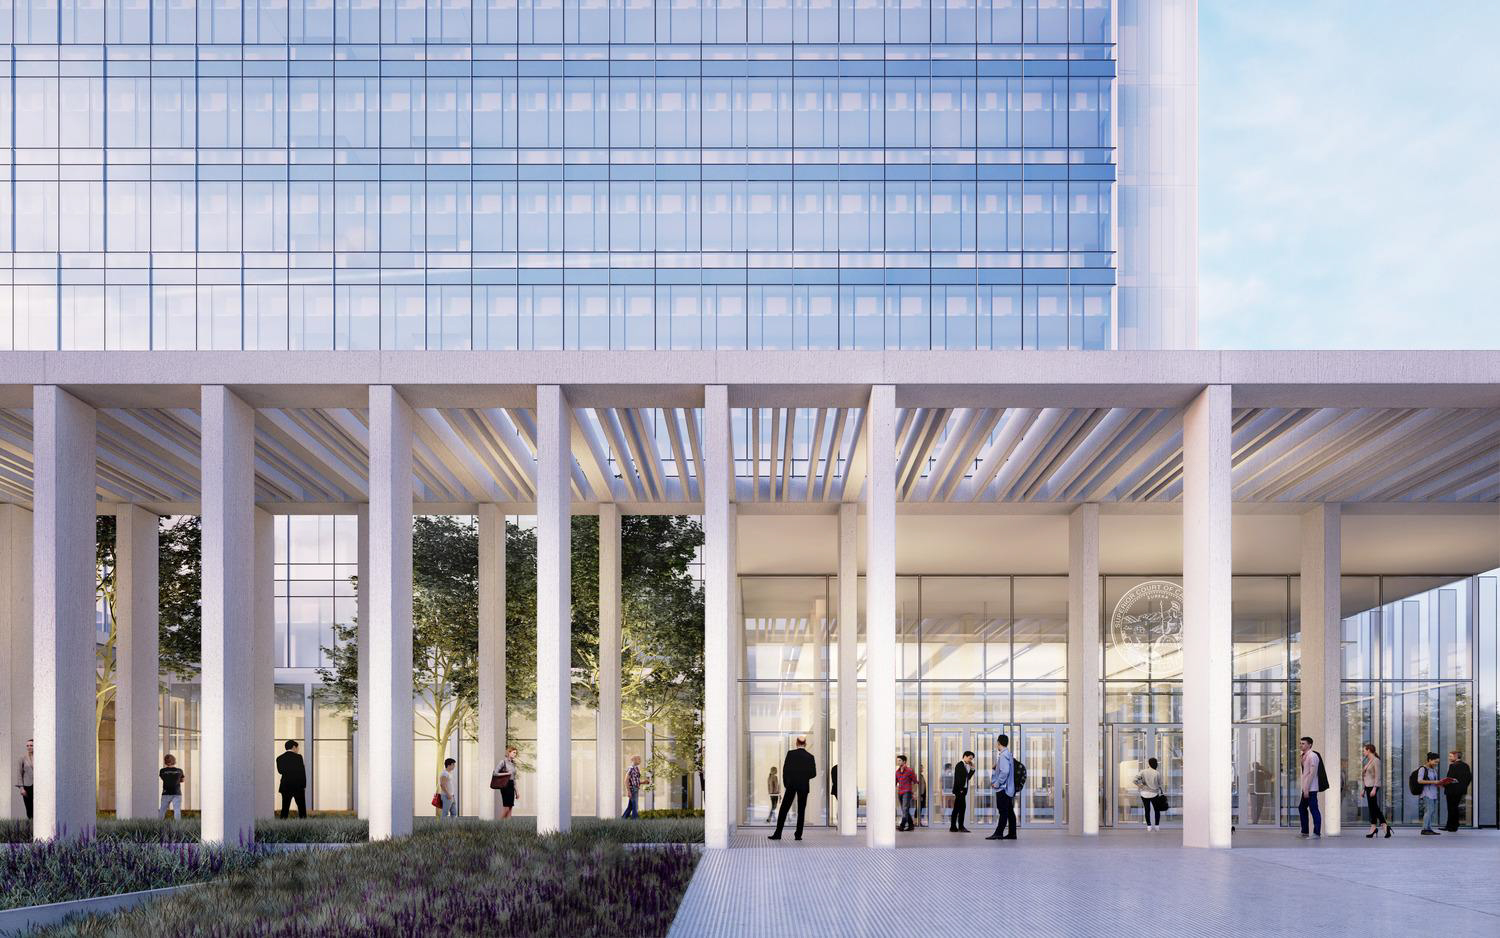 Sacramento Courthouse Building central courtyard, rendering by NBBJ